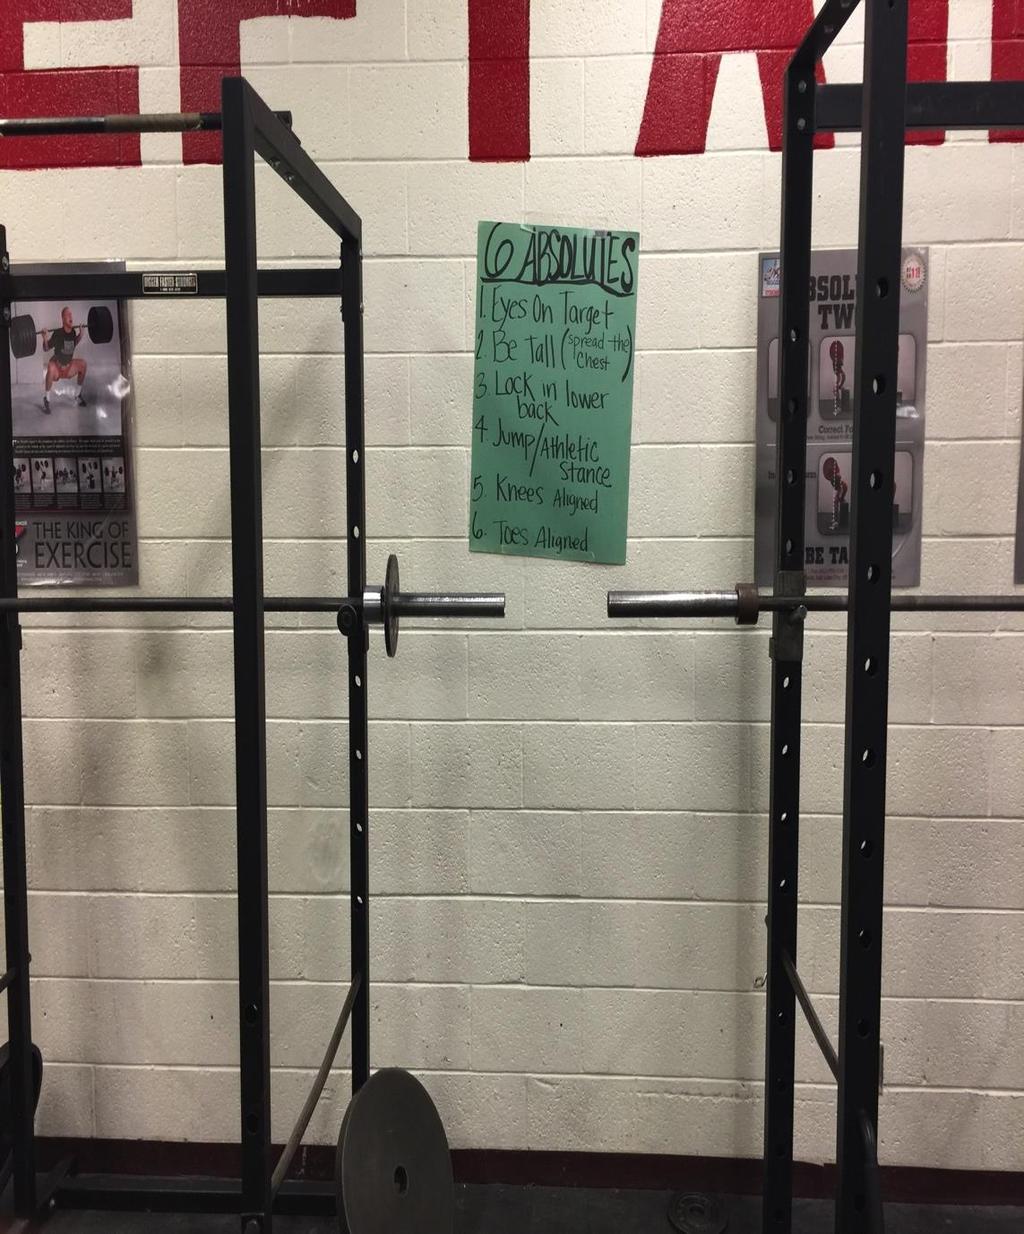 SHS Weight Room Concerns Cardio Equipment/Selector (Cable Equipment): Lack of signage for cardio & selector equipment explaining proper use